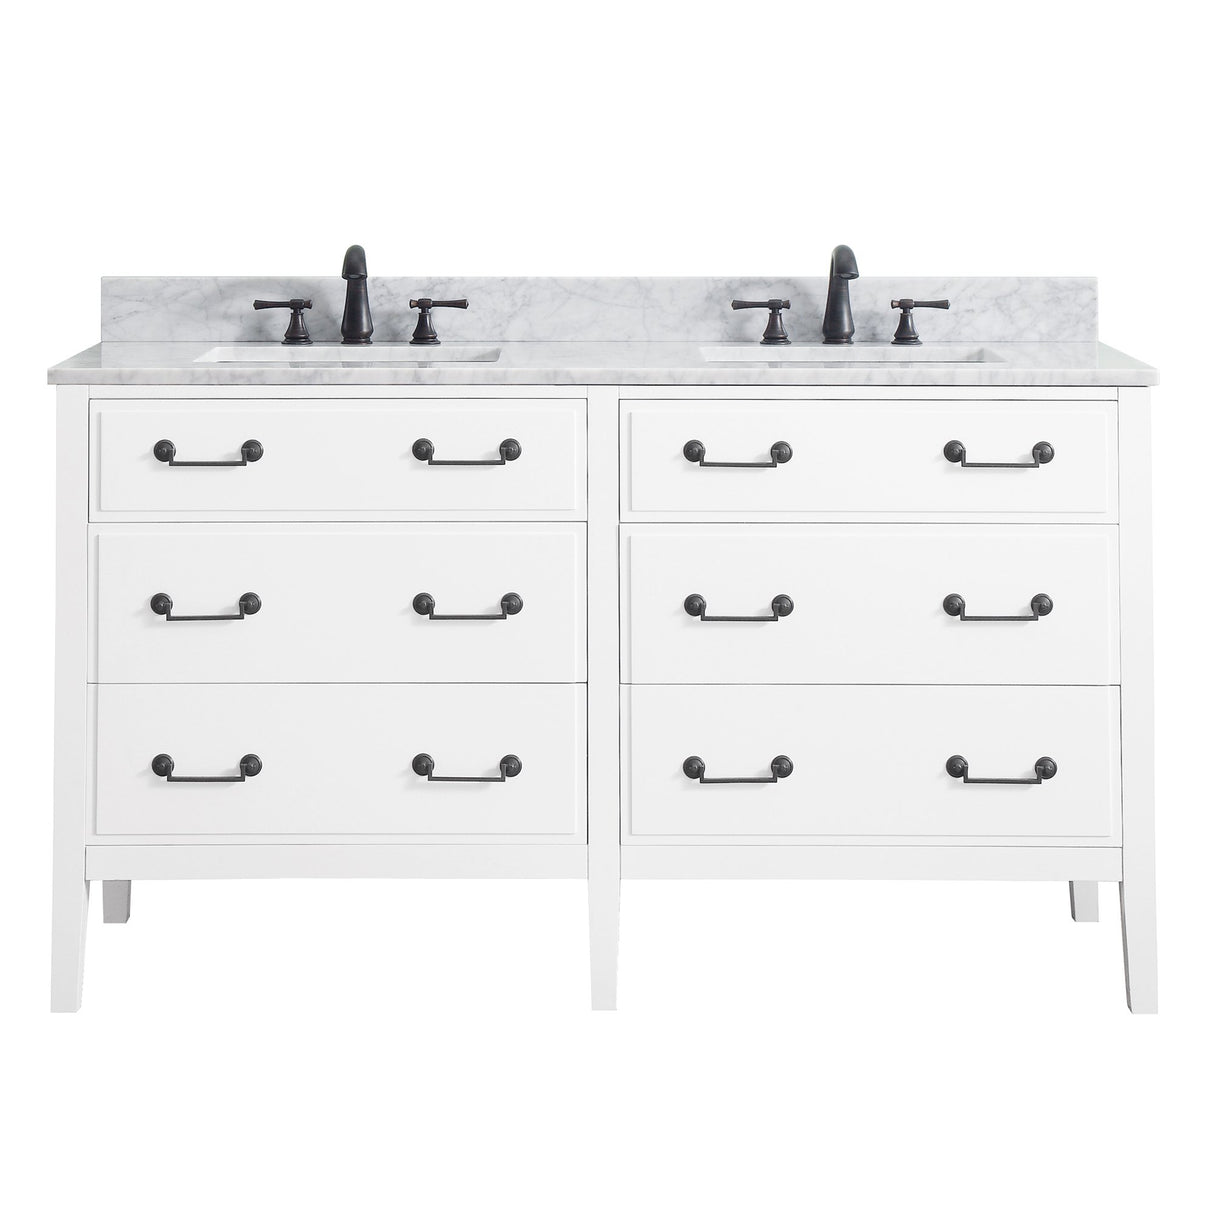 Avanity Delano 61 in. Double Vanity in White finish with Carrara White Marble Top